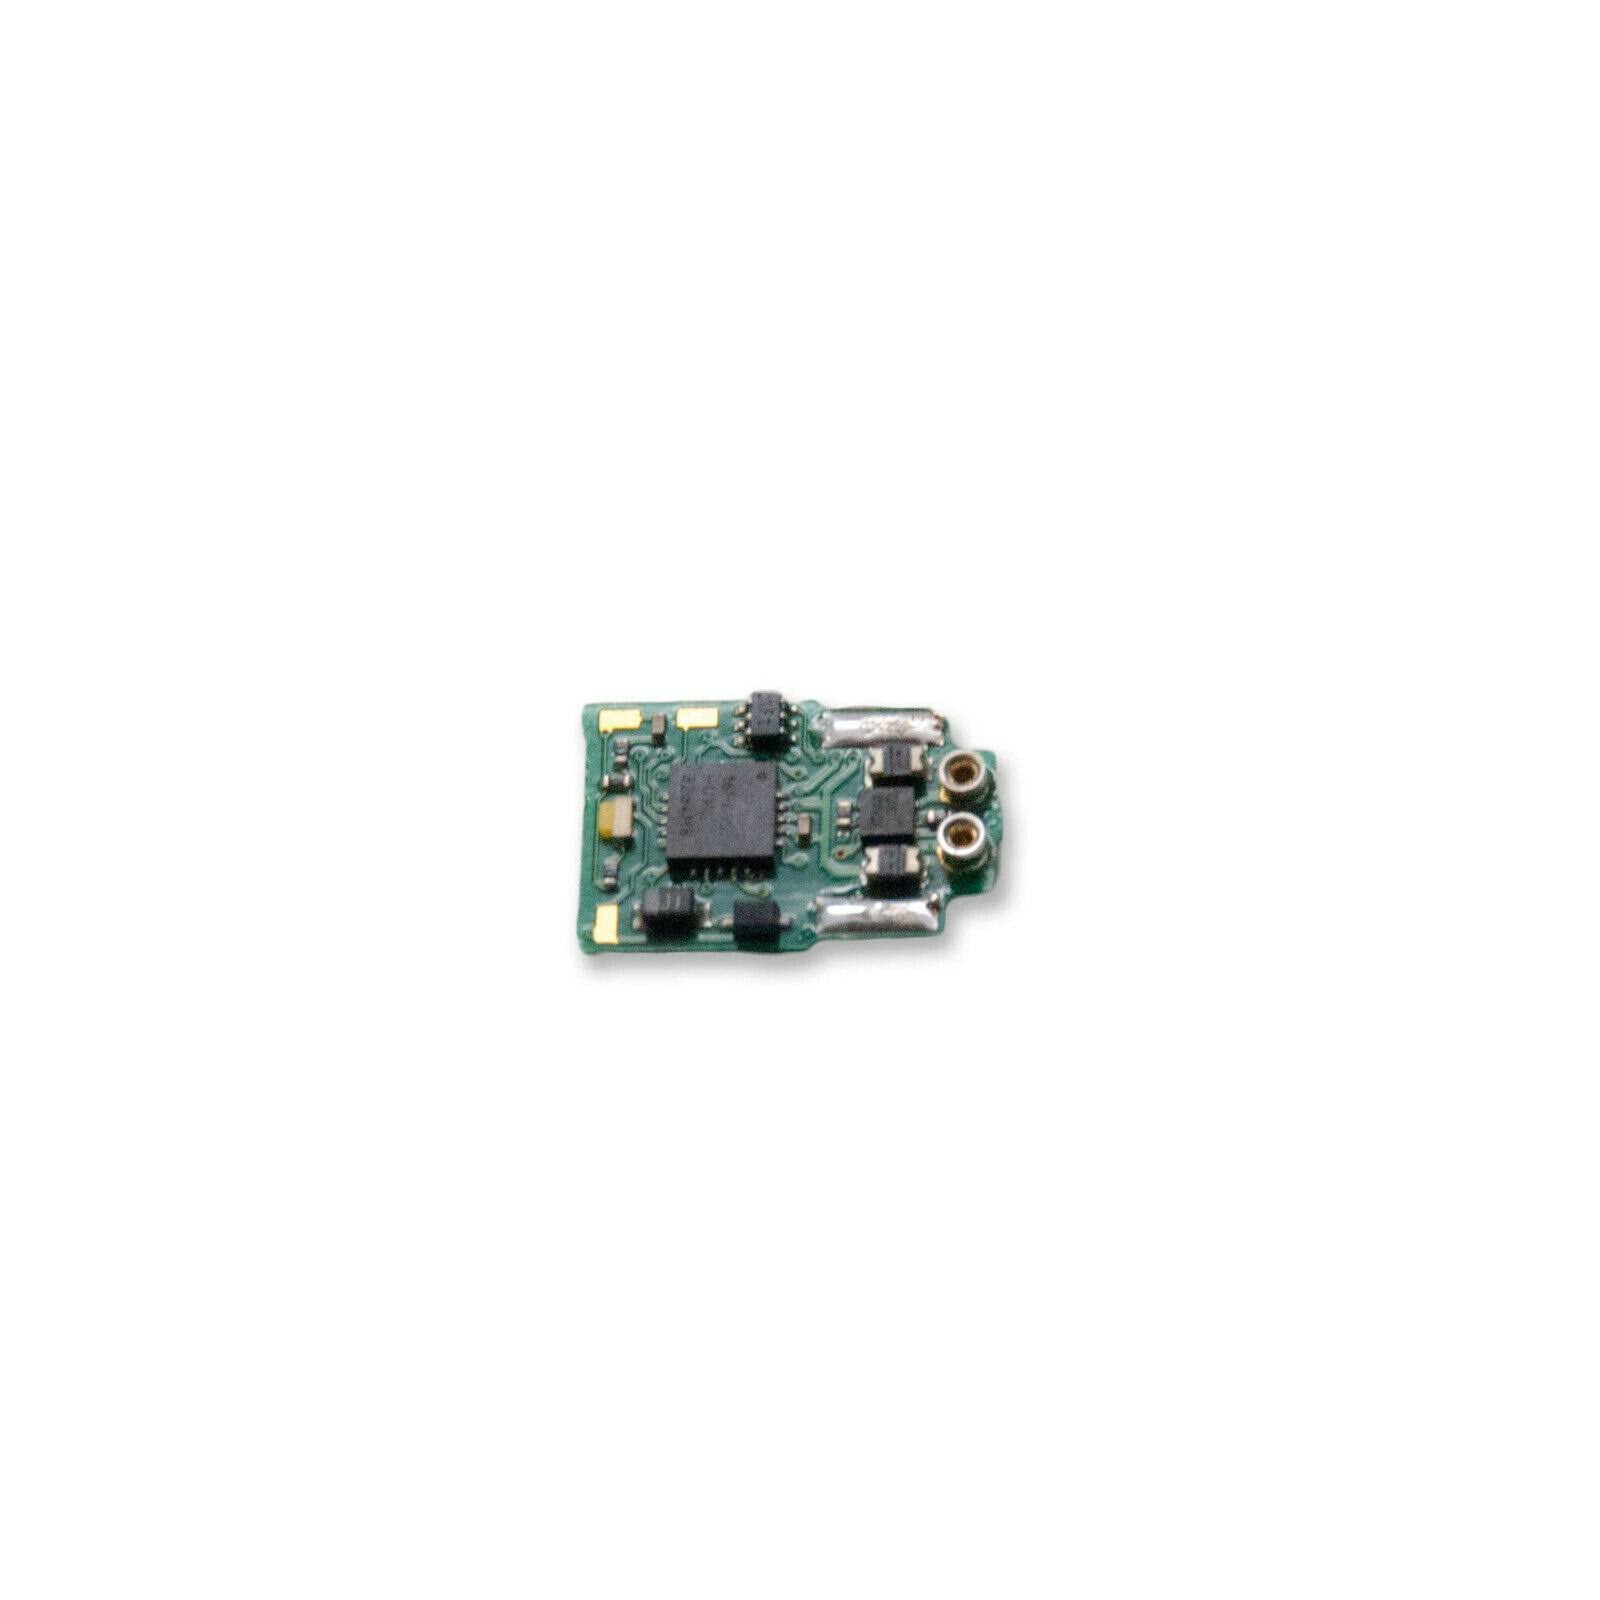 Digitrax DN126M2 DCC Decoder for Micro-Trains SW1500